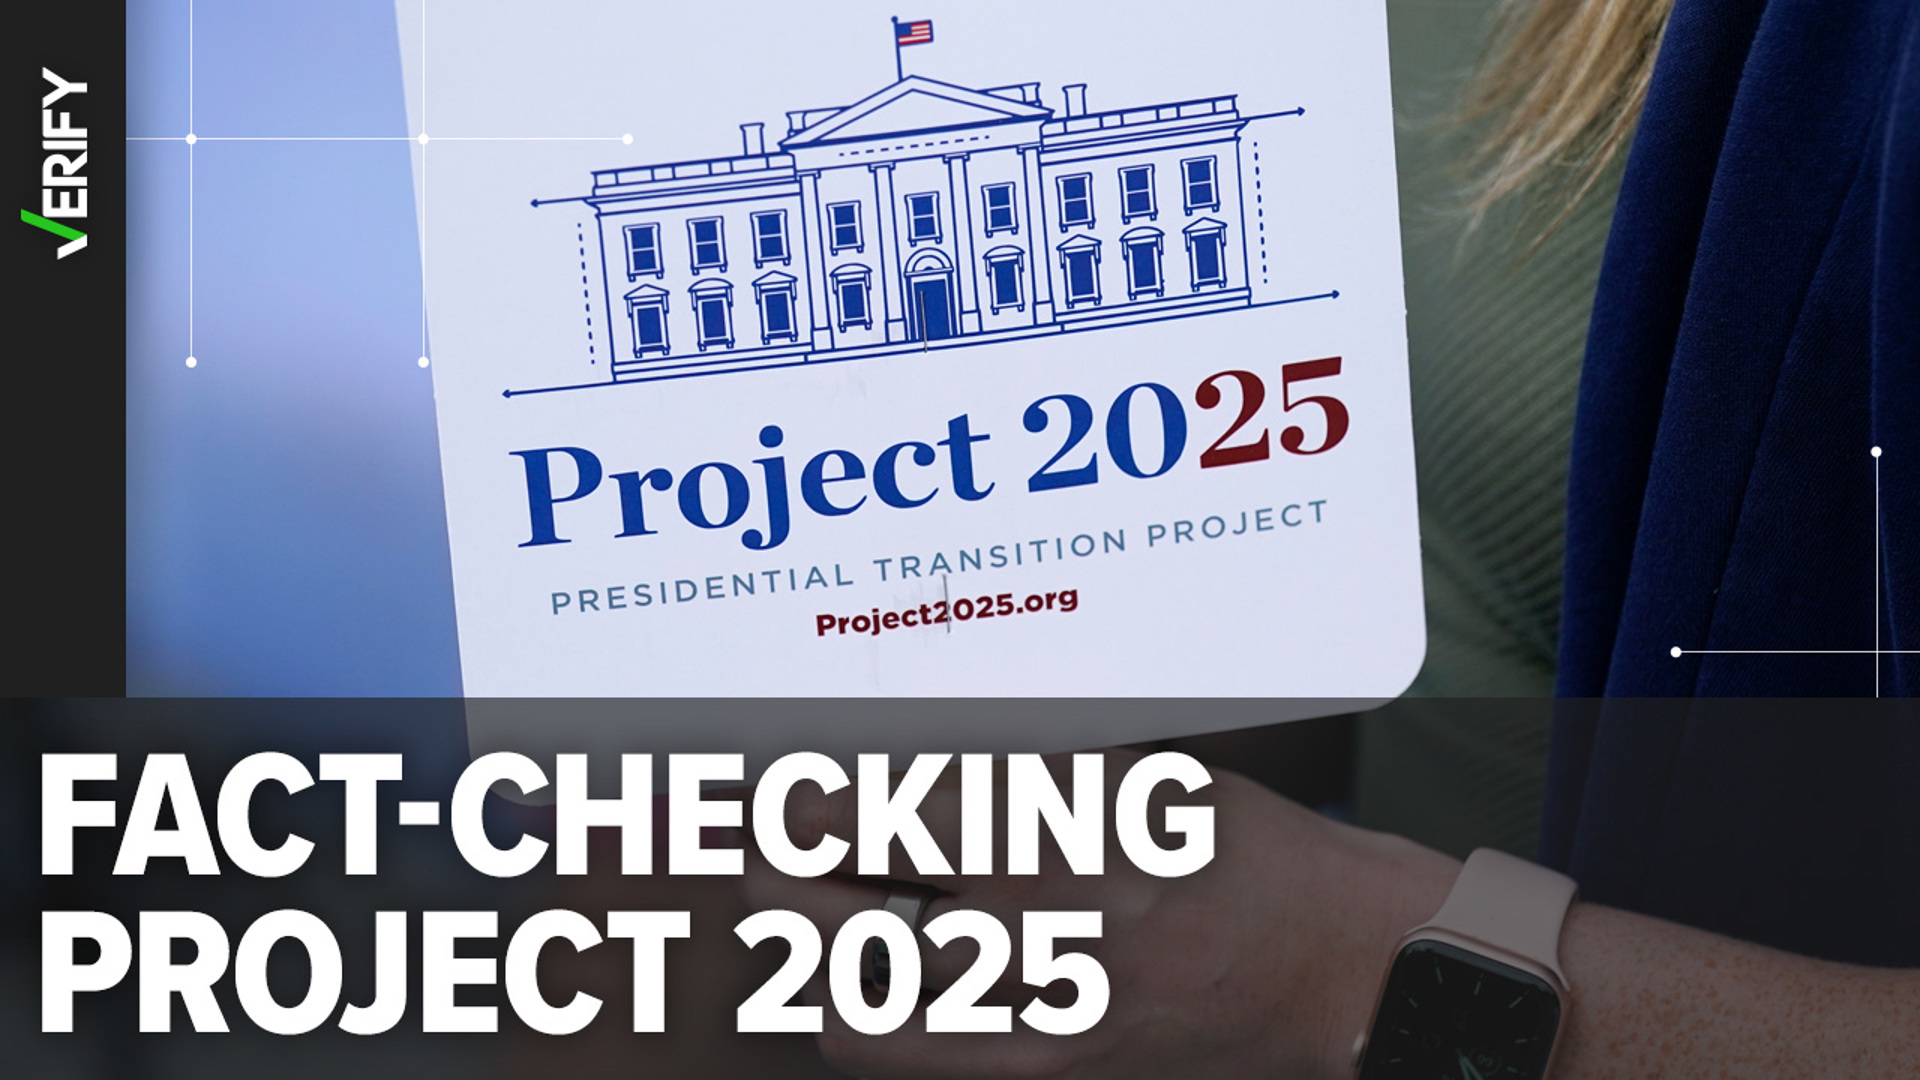 VERIFY readers asked us if it’s true that Project 2025, the Heritage Foundation’s plan to transform the government, calls for defunding public broadcasting.